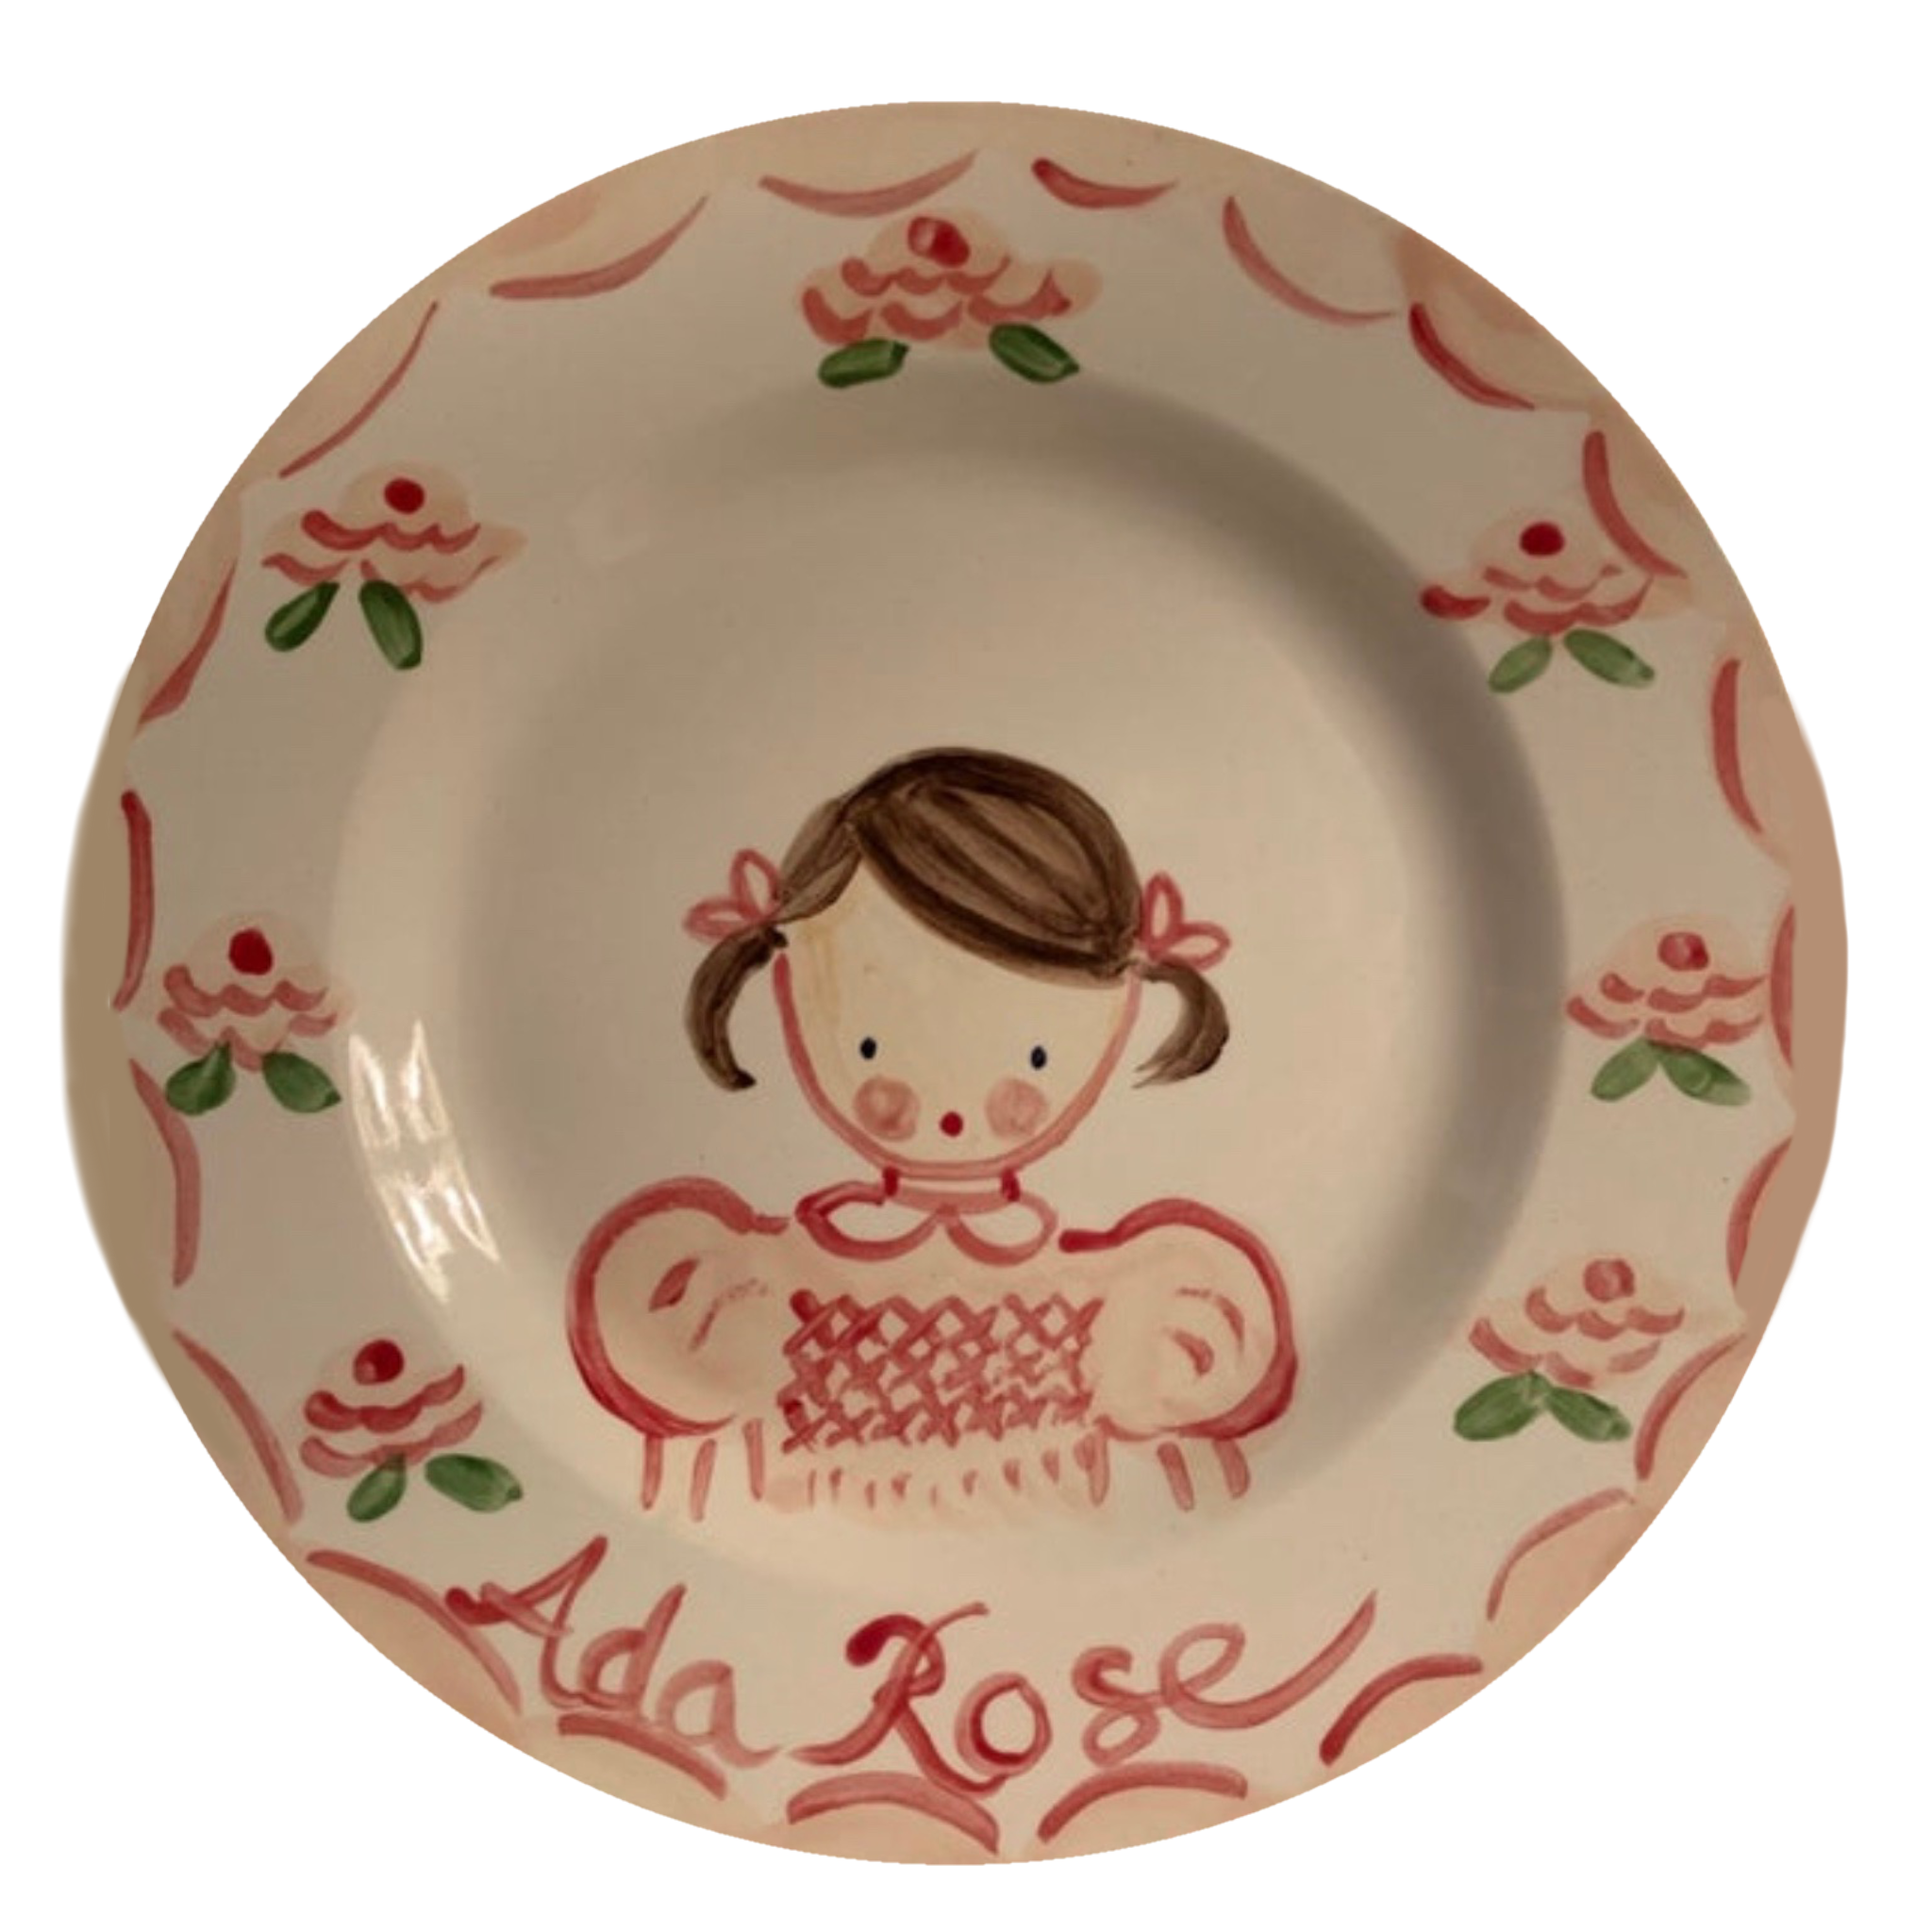 Simple Girl's Plate - Tricia Lowenfield Design